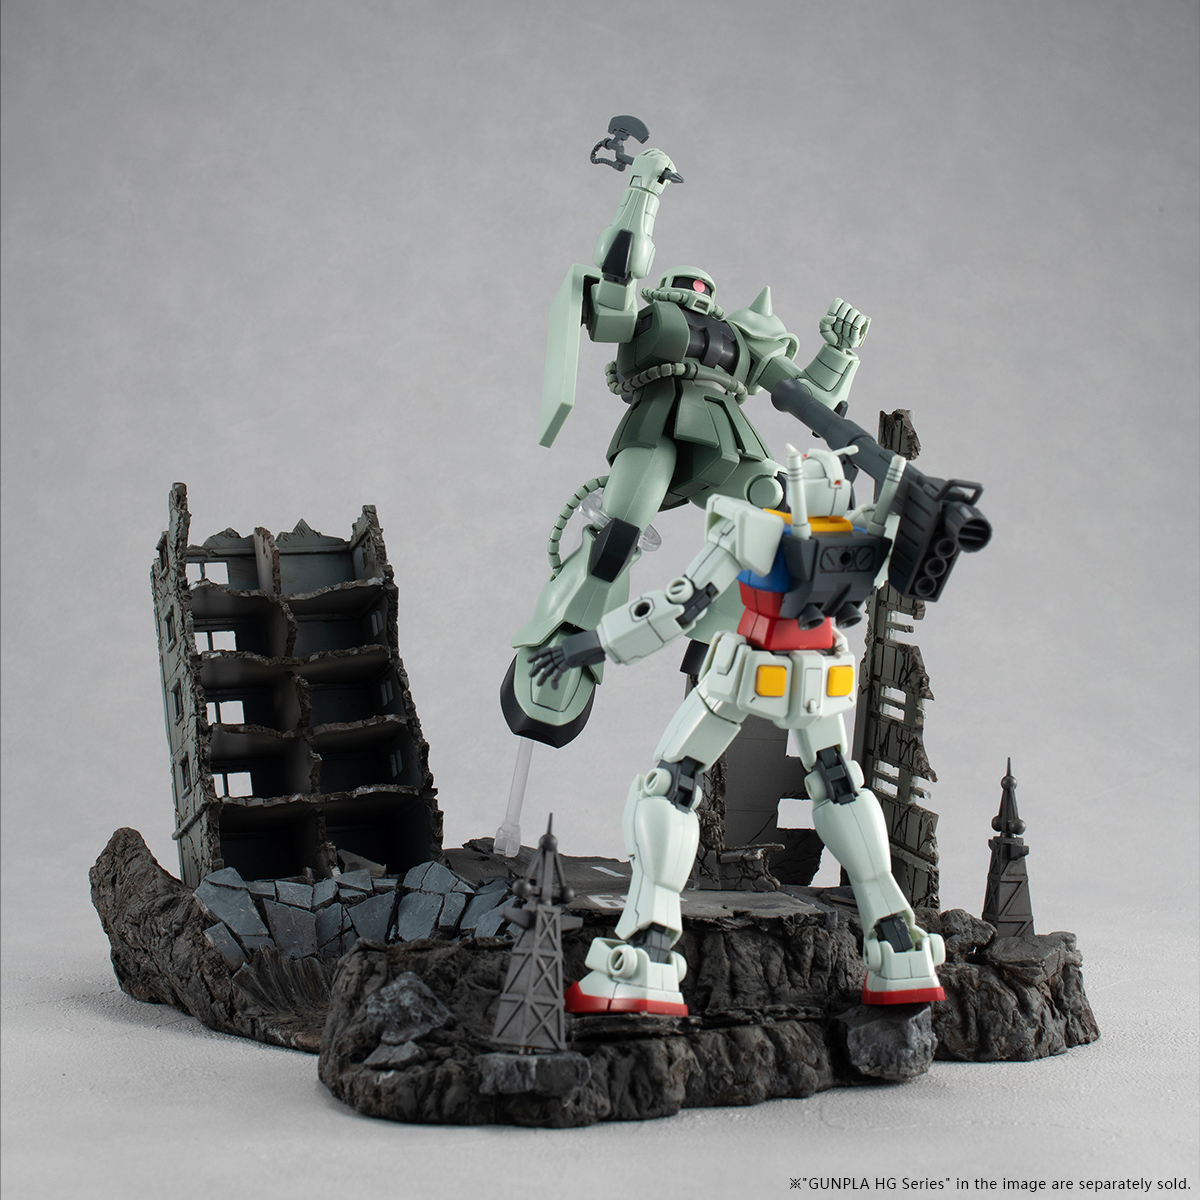 REALISTIC MODEL SERIES MOBILE SUIT GUNDAM (FOR 1/144 HG SERIES) G STRUCTURE 【GS02】RUINS AT NEW YARK